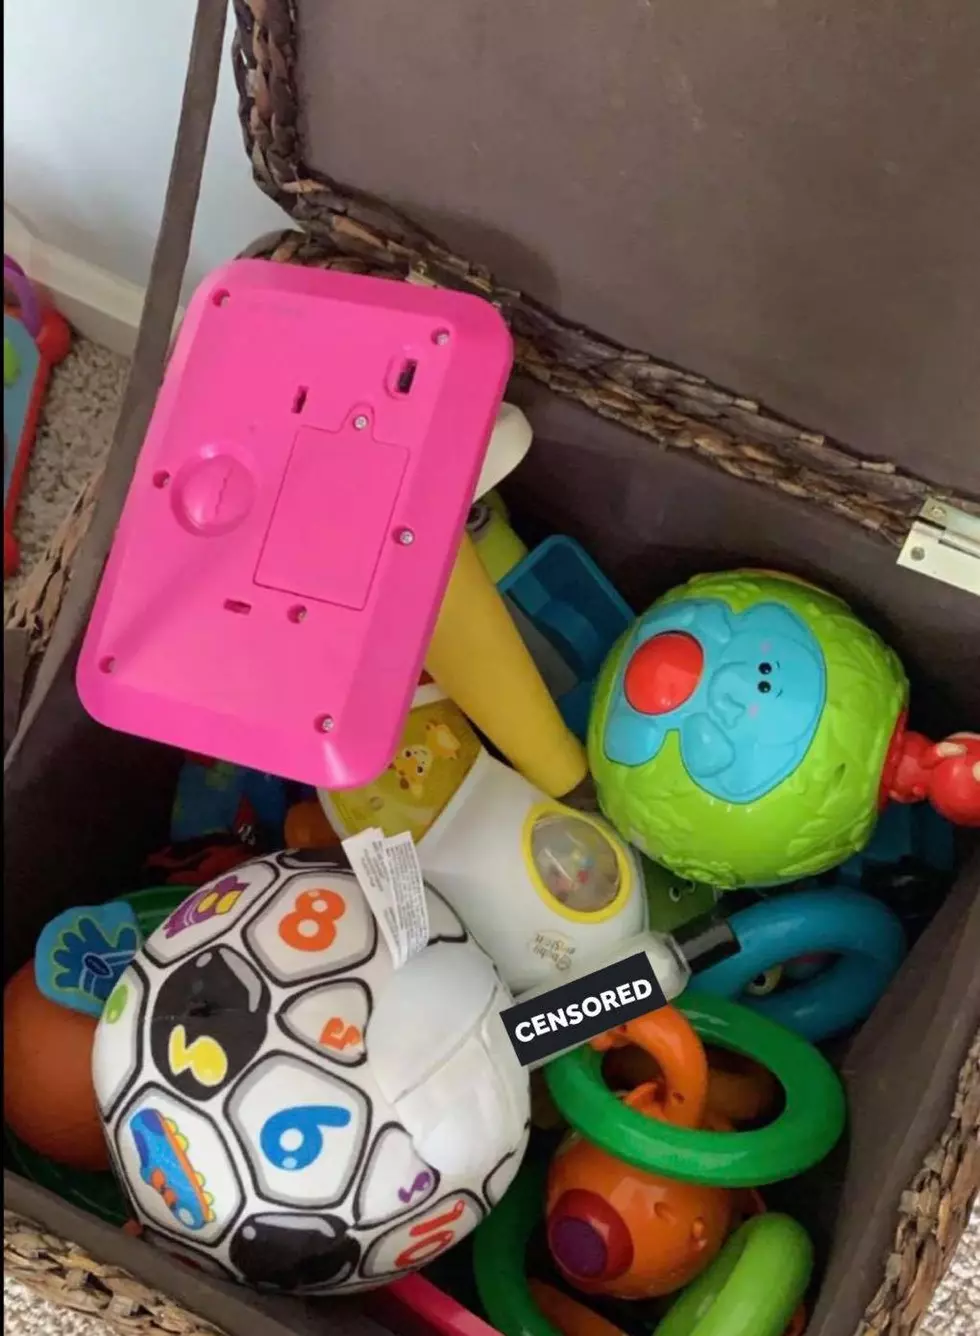 You’ll Never Guess What Maddie Found in Her Son’s Toy Box